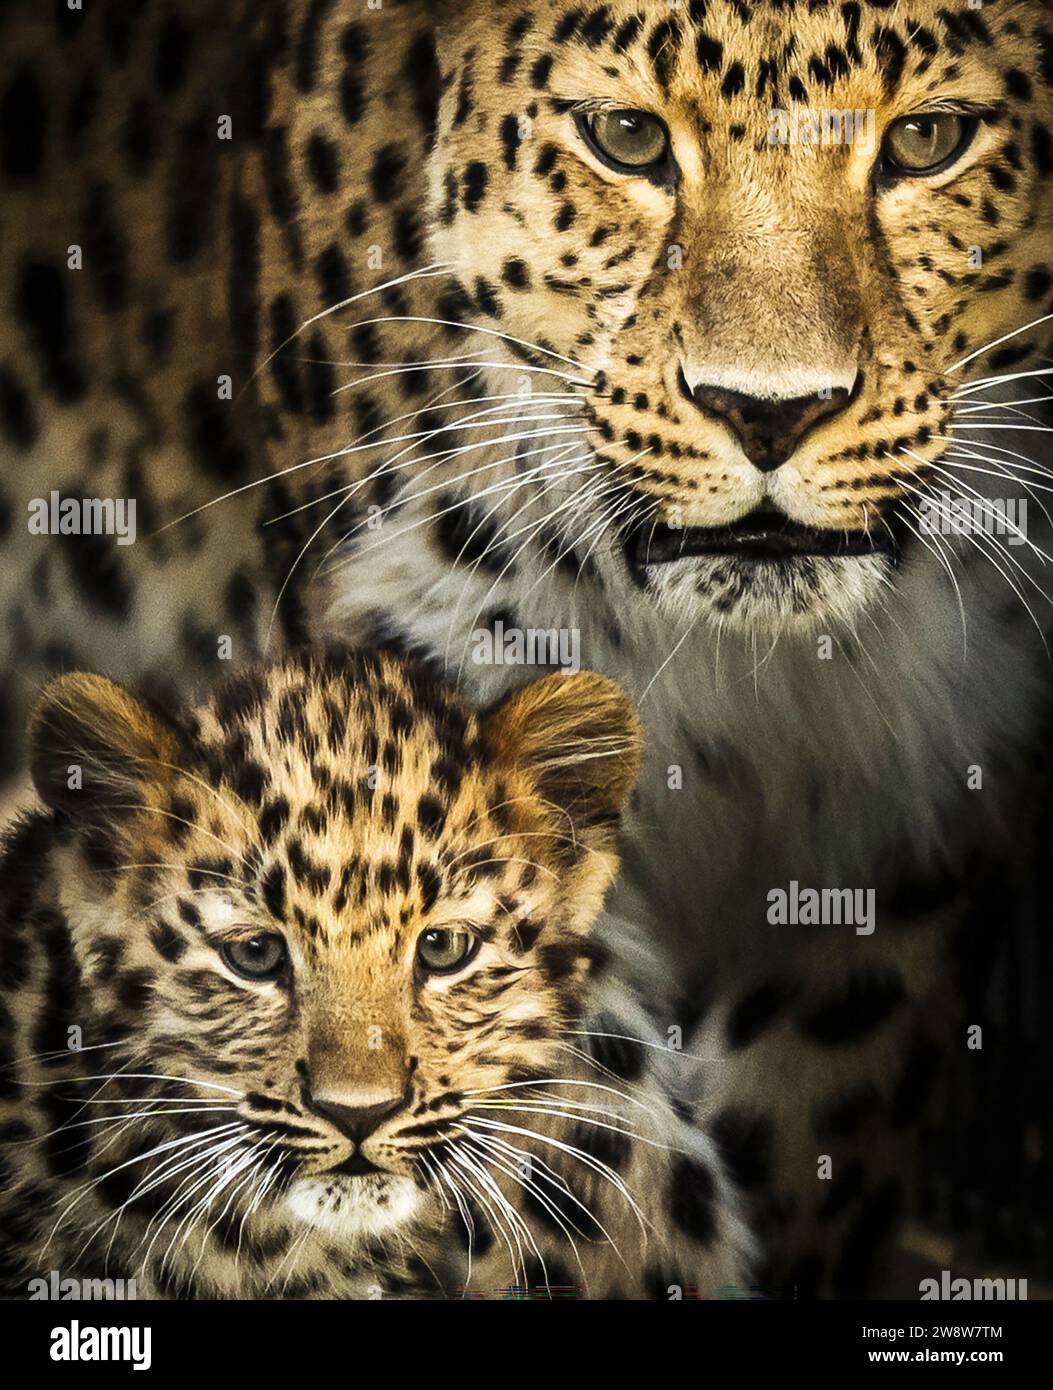 PA PHOTOGRAPHER PICTURE OF THE YEAR 2023 - Danny Lawson. File photo dated 10/09/23 - Amur leopards are critically endangered, meaning they face an extremely high risk of extinction in the wild. The only surviving Amur leopard cub, born in the European breeding programme in 2023, is pictured here with its mother at Yorkshire Wildlife Park. There are 48 zoos in the programme whose long-term aim is to reintroduce more Amur Leopards back into protected areas of their native habitat. Issue date: Friday December 22, 2023. Stock Photo